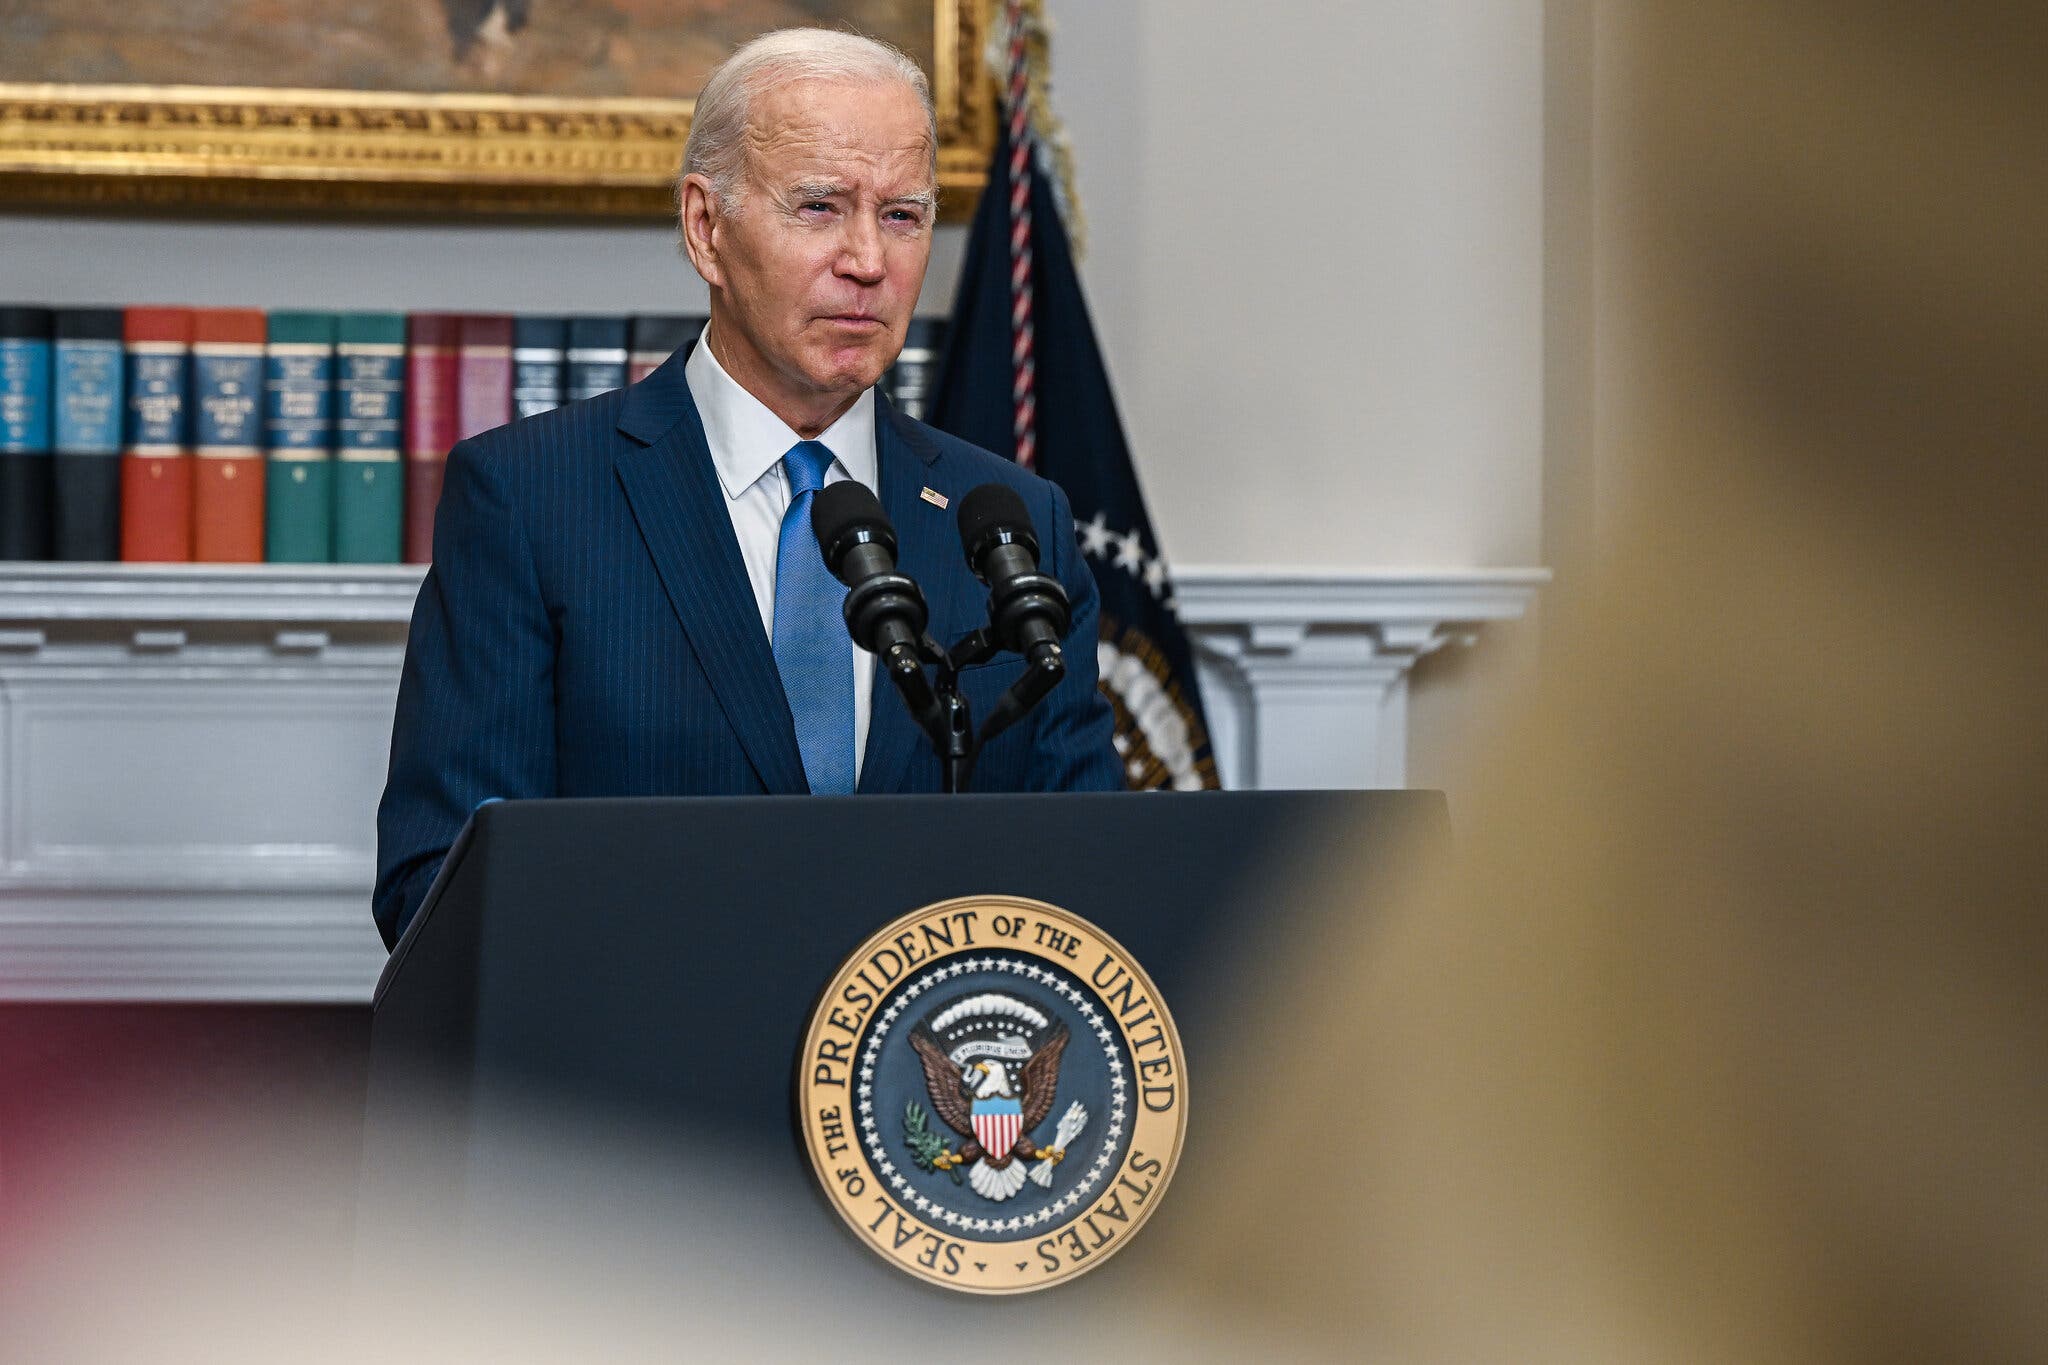 Biden to Restrict Investments in China, Citing National Security Threats